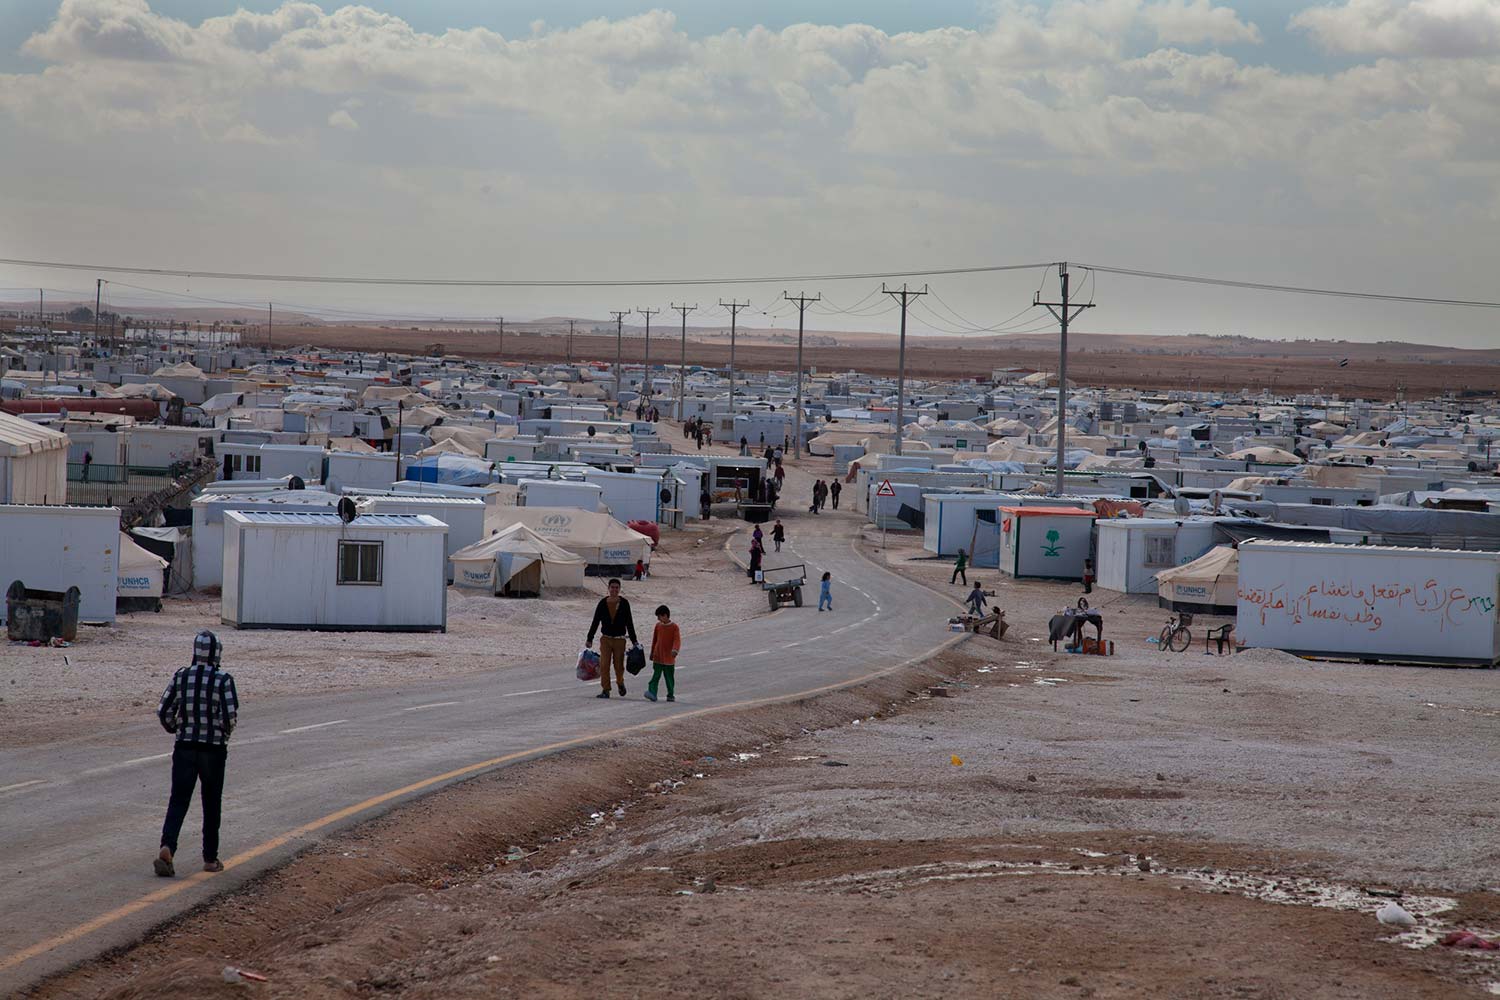 Refugees at the Syrian border. USHMM/Lucian Perkins.